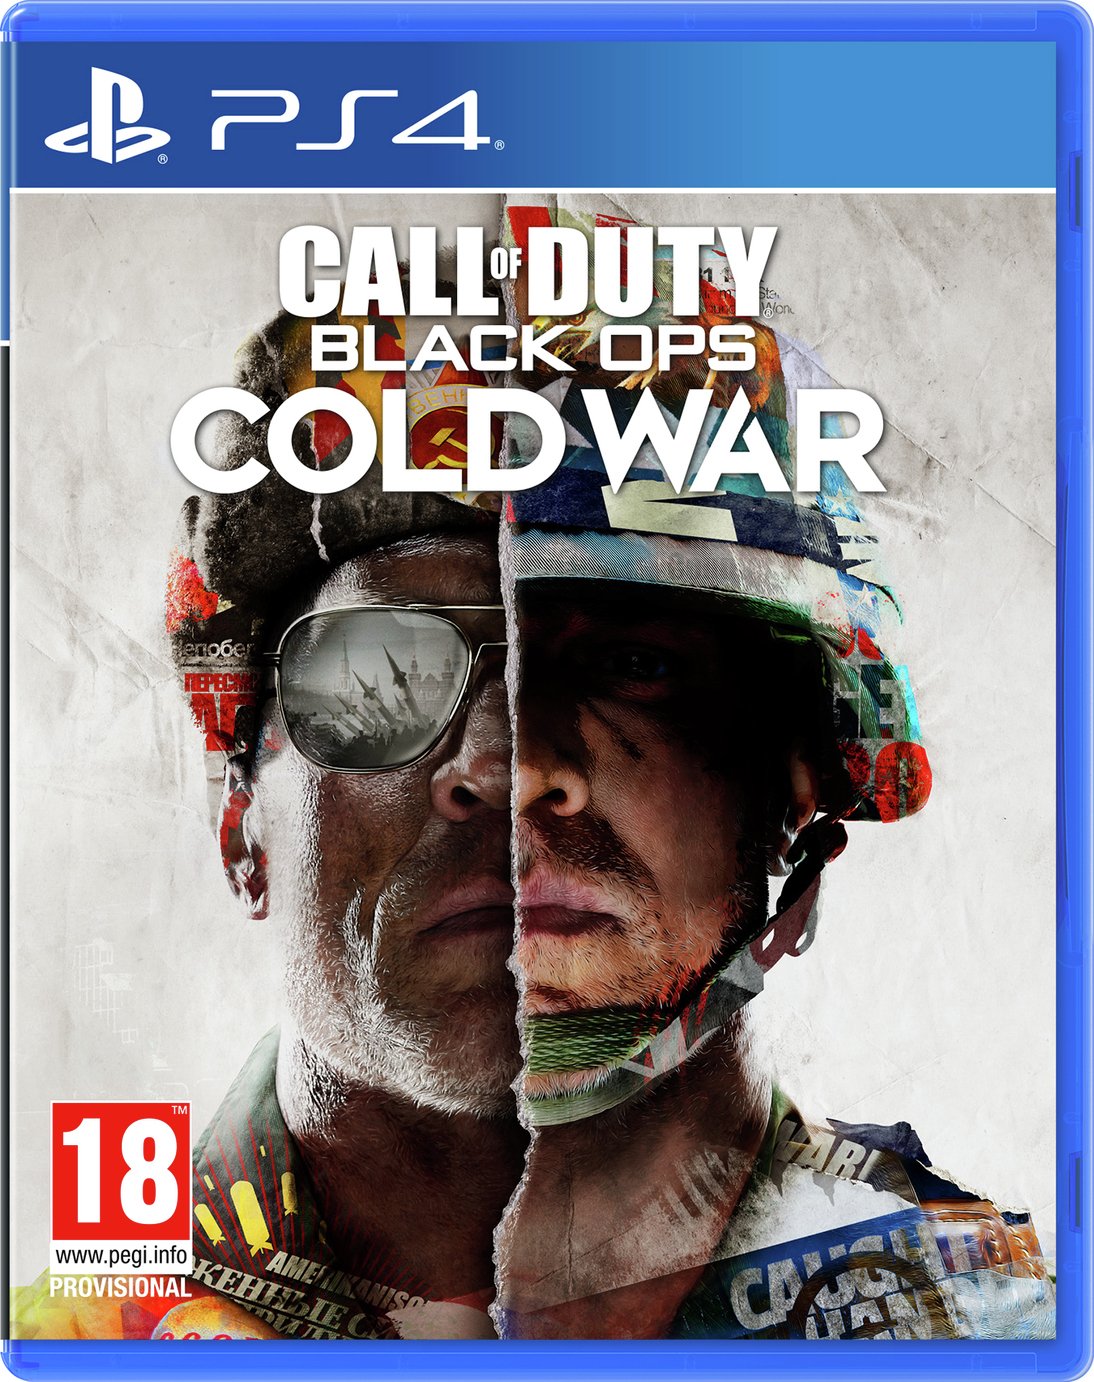 call of duty black ops ps4 game